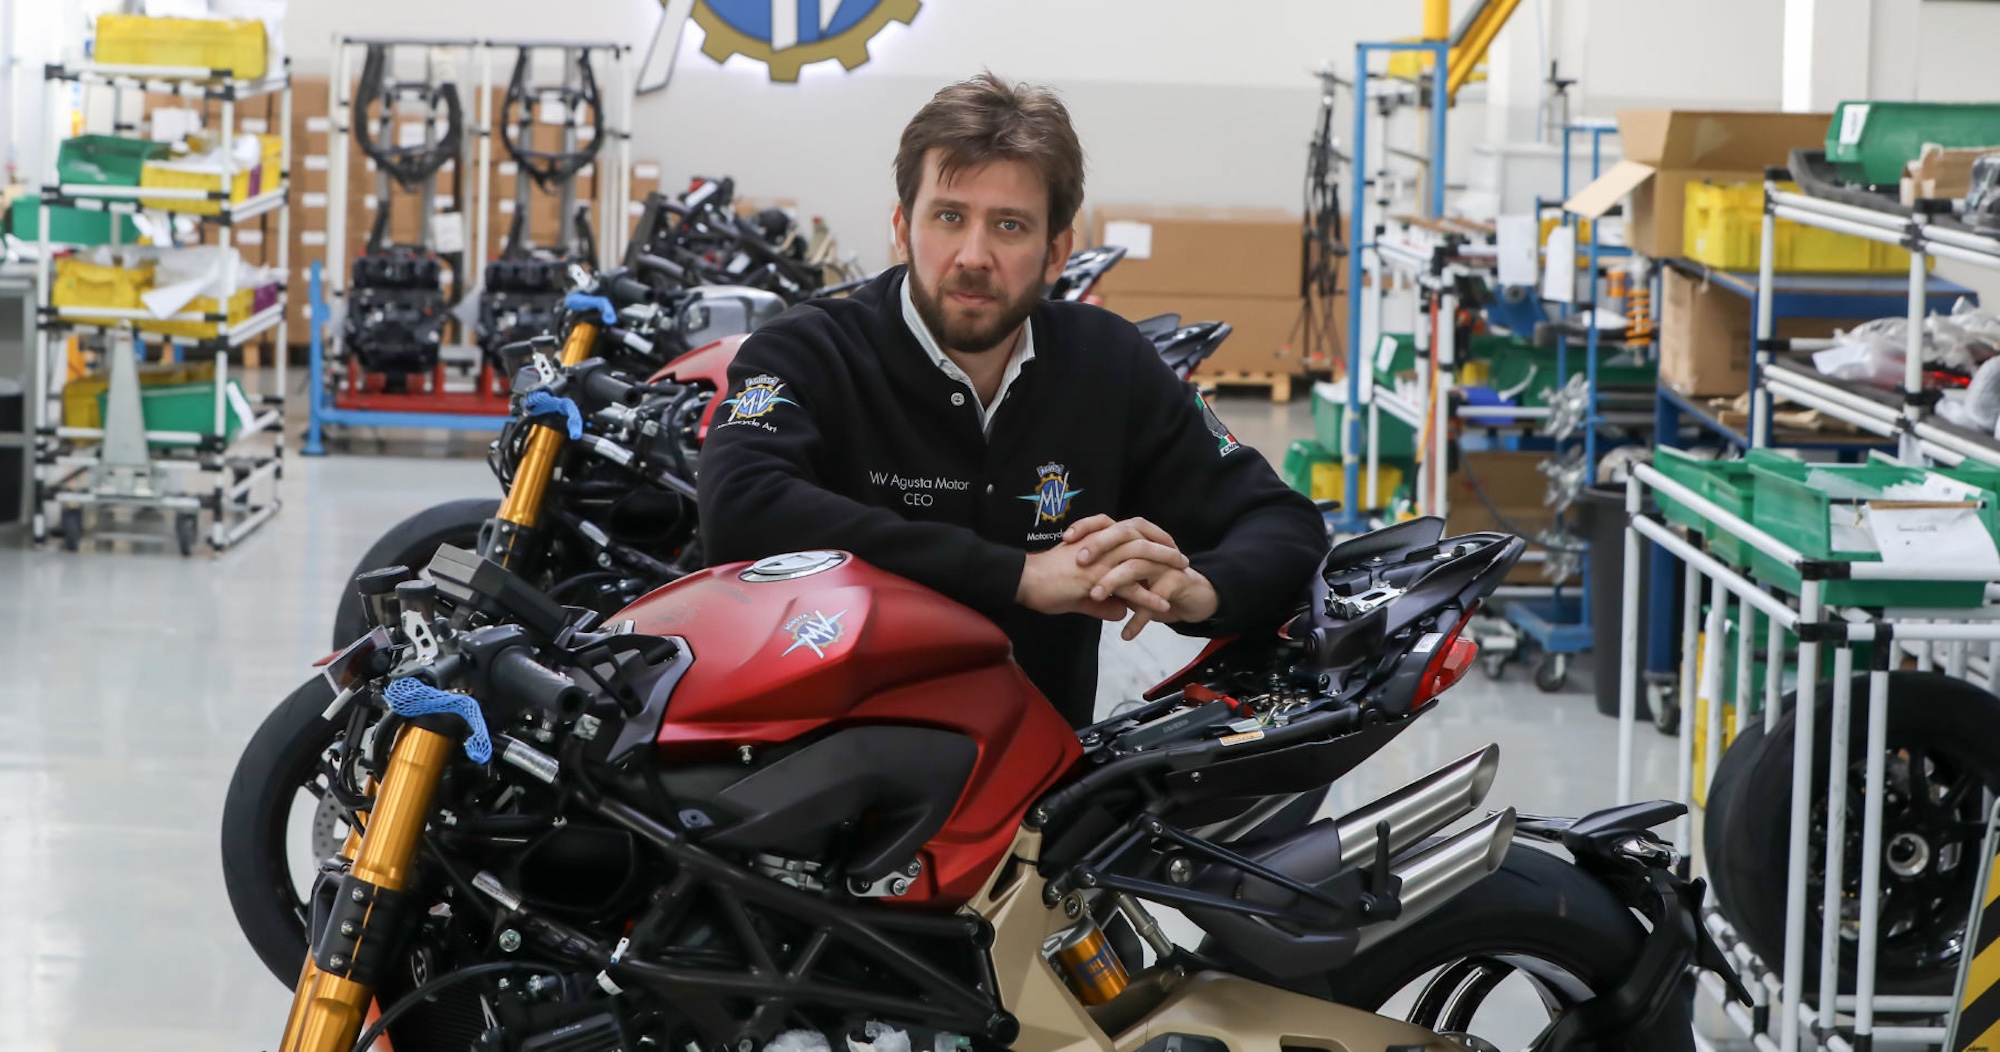 A motorcycle company founder with his motorcycles.